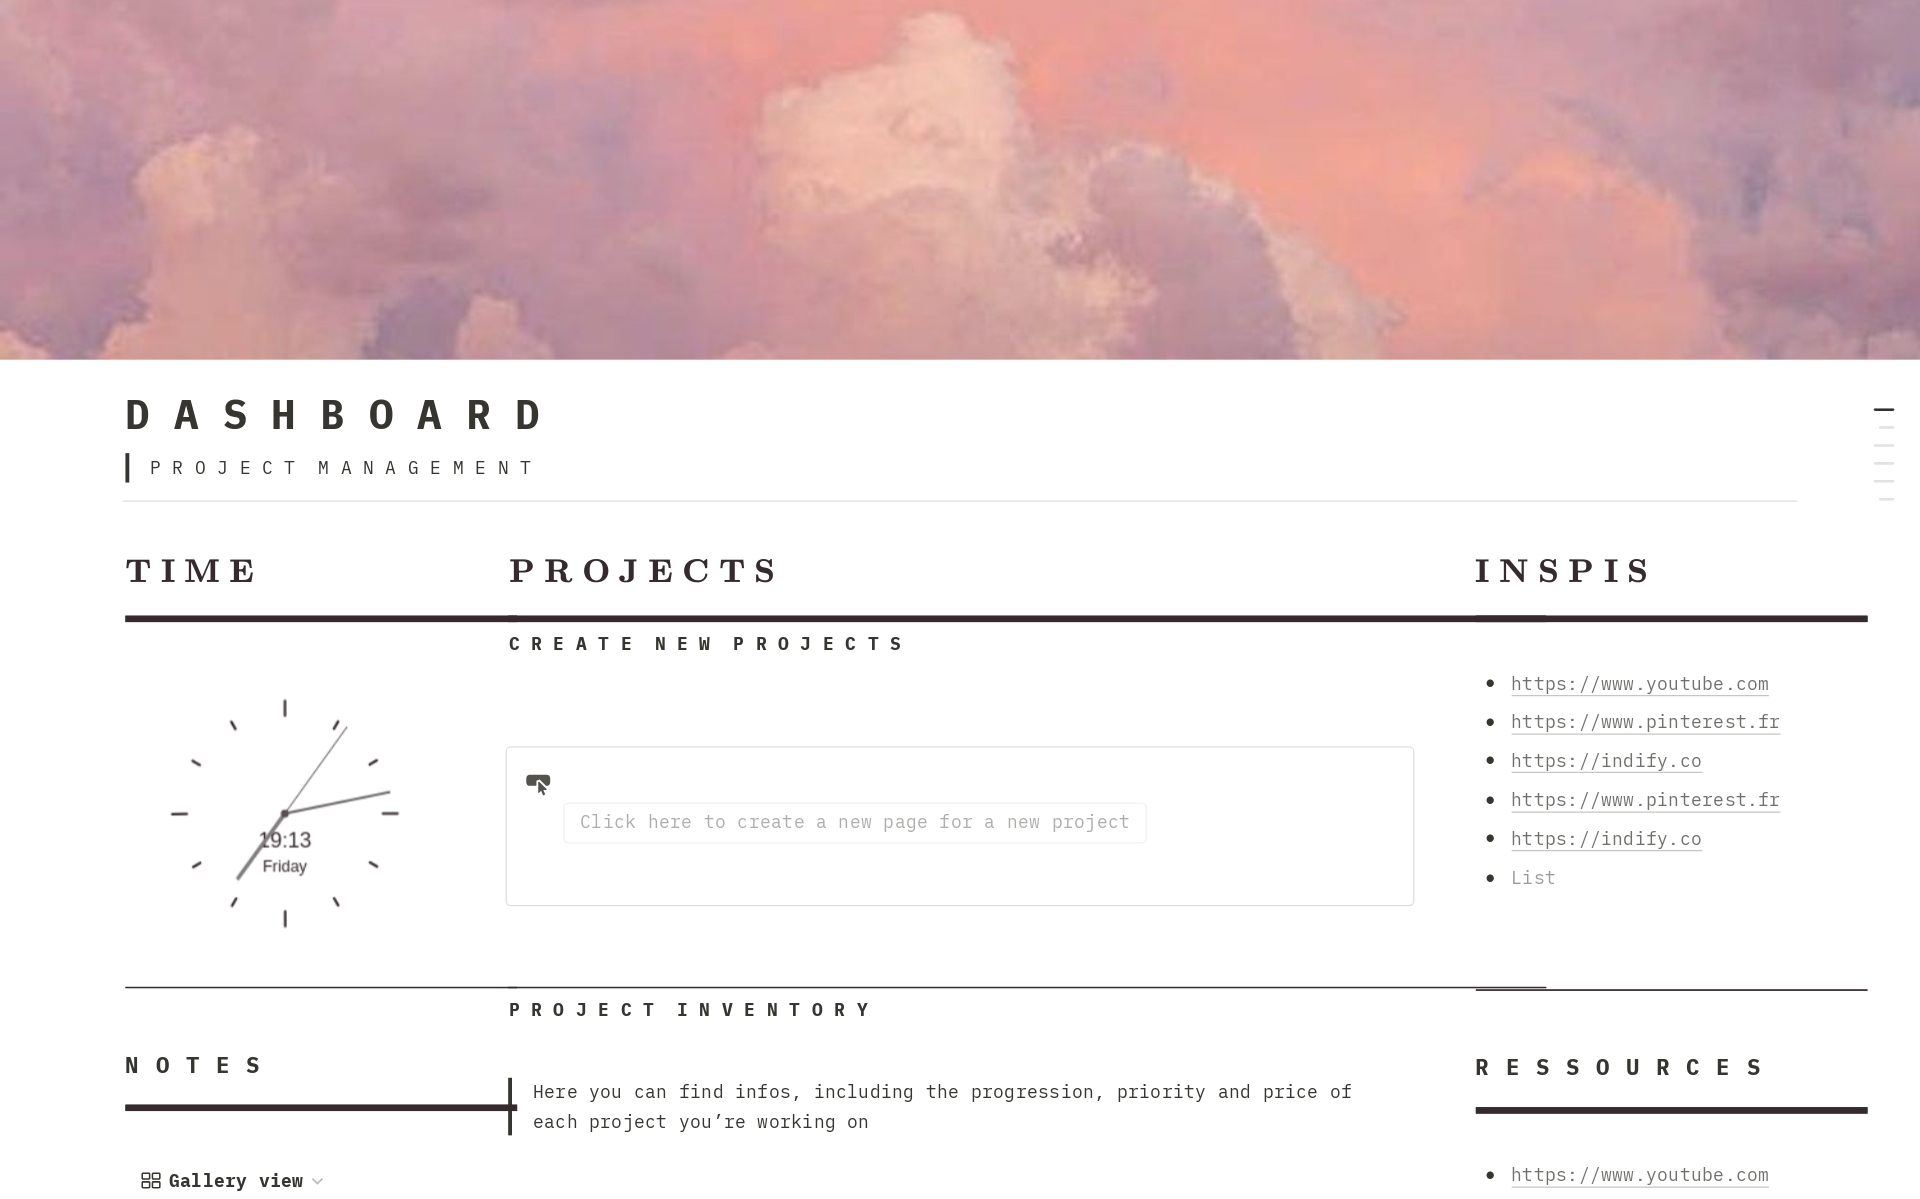 This Notion dashboard template is an all-in-one tool for managing time and projects, featuring customizable elements, live clock widgets, detailed project inventories, and a section for feedback. It includes a button for creating new project pages and links to inspirations.